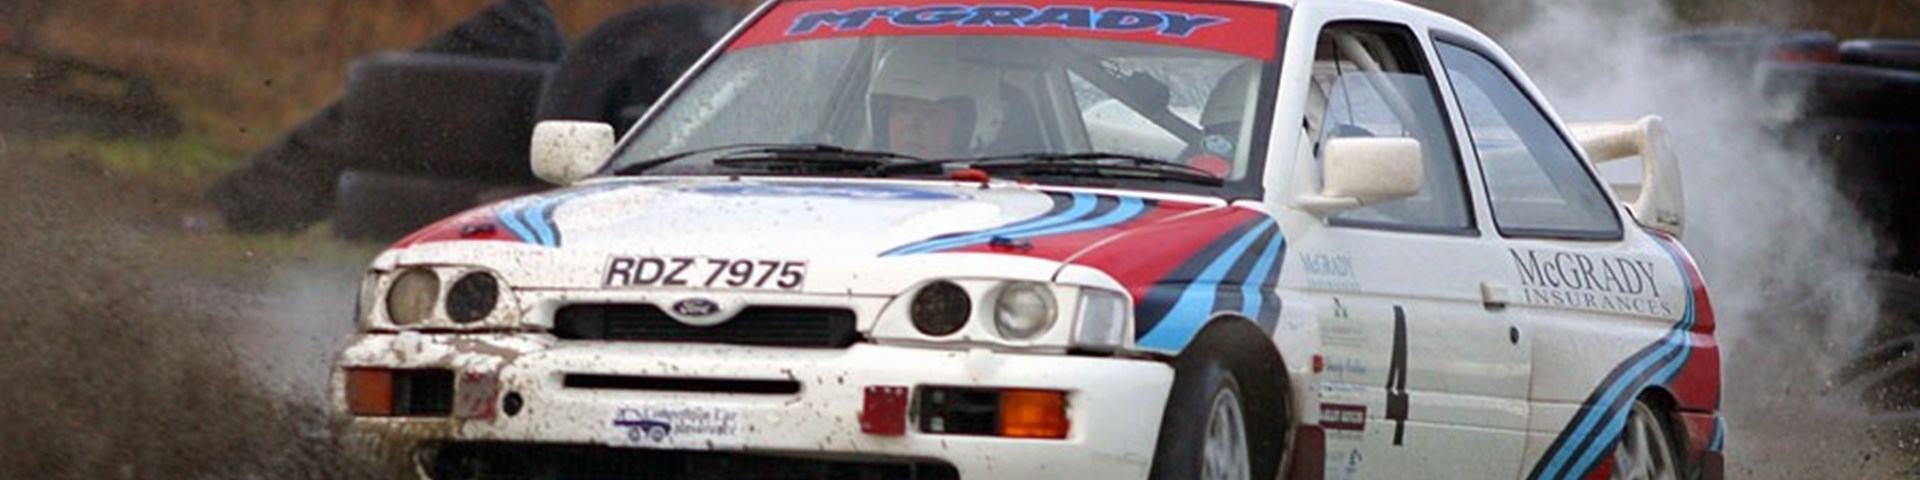 Rally car covered by rally car insurance 